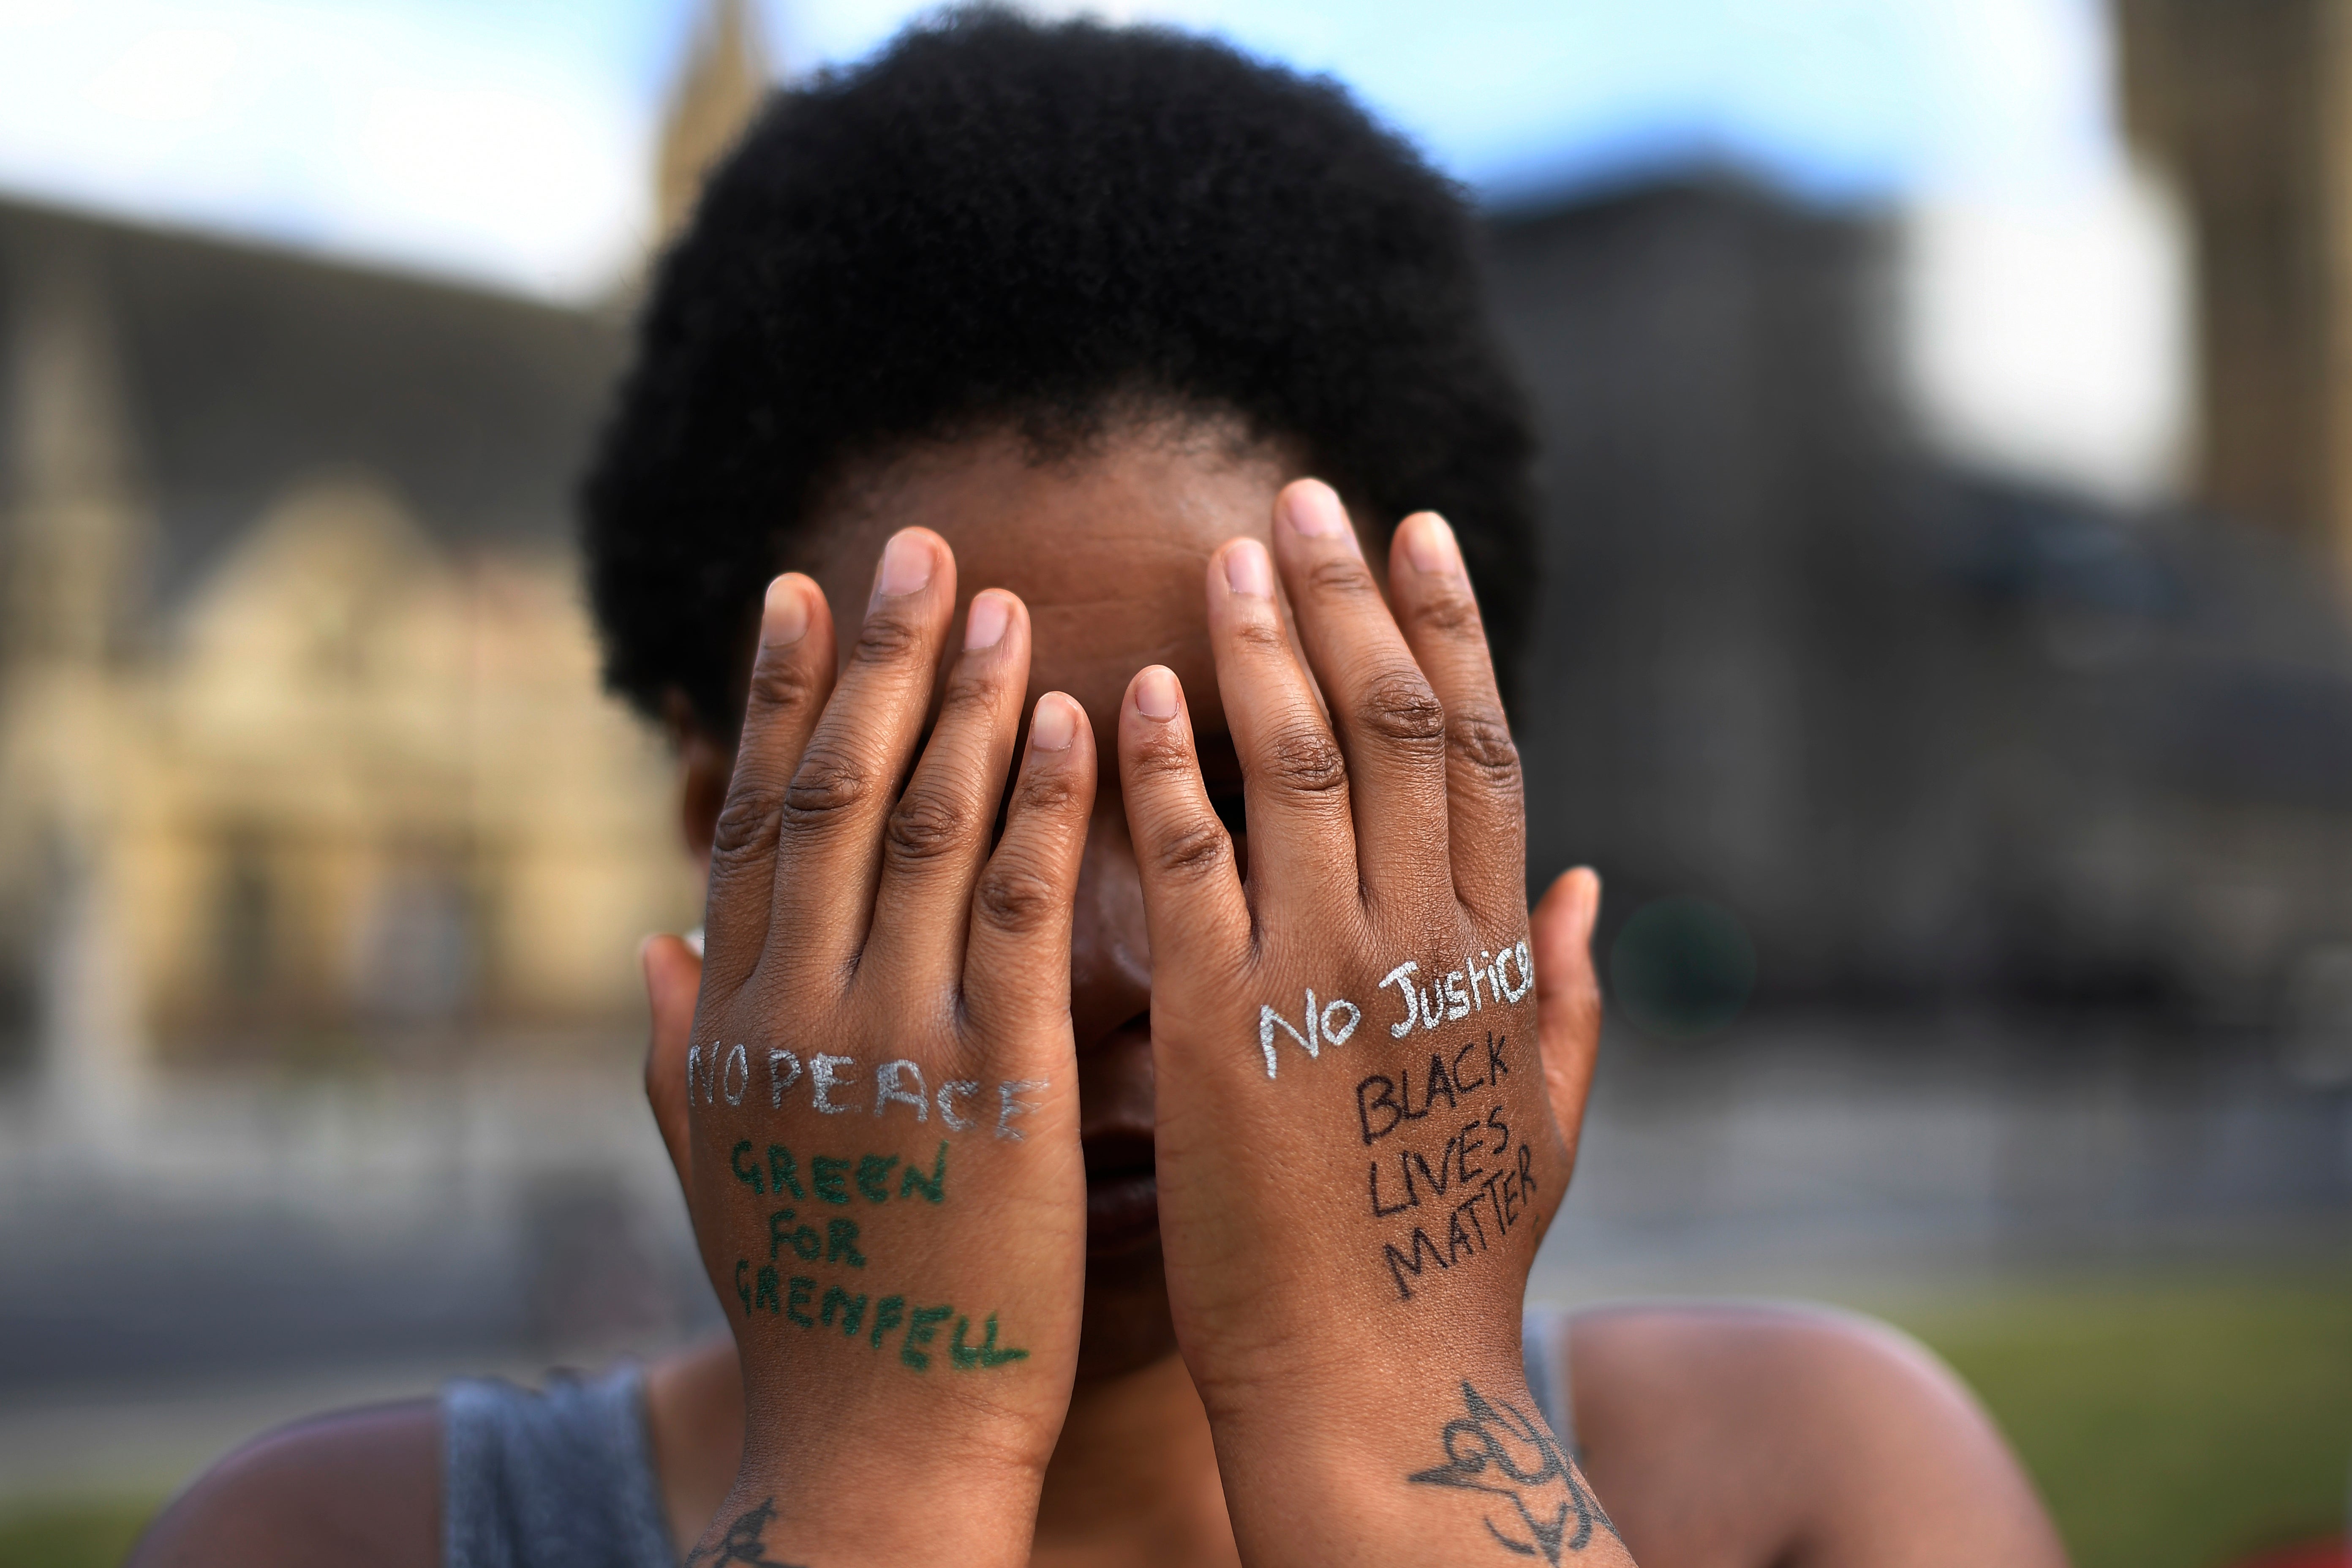 A woman symbolically covers her eyes as she participates in a Black Lives Matter protest in June 2020